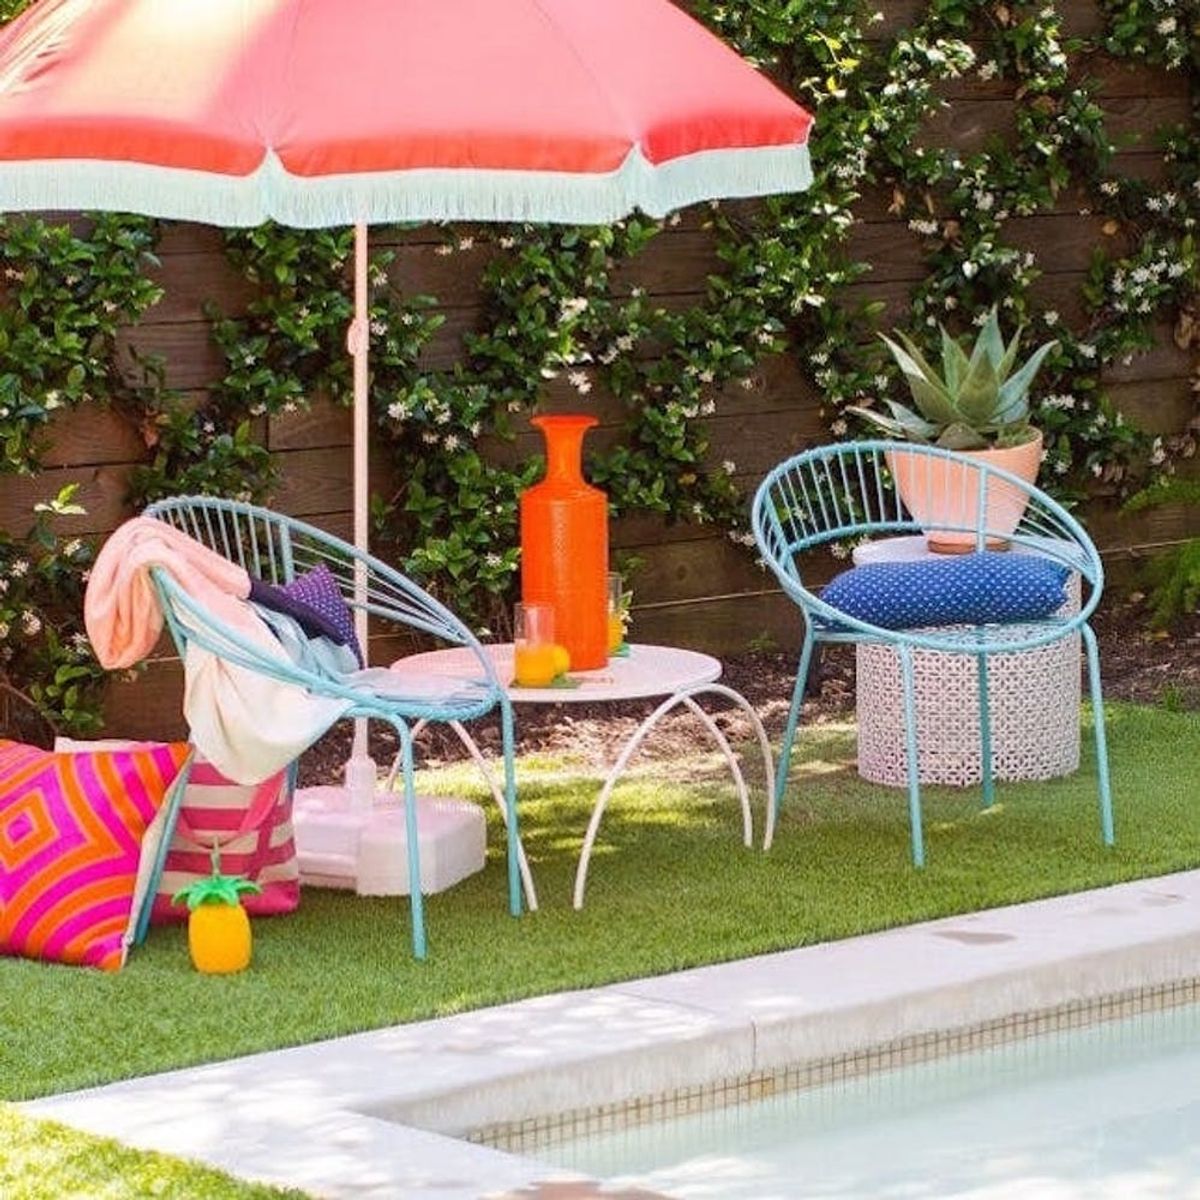 13 Ways to Keep Everyone Cool at Your Next Summer Party